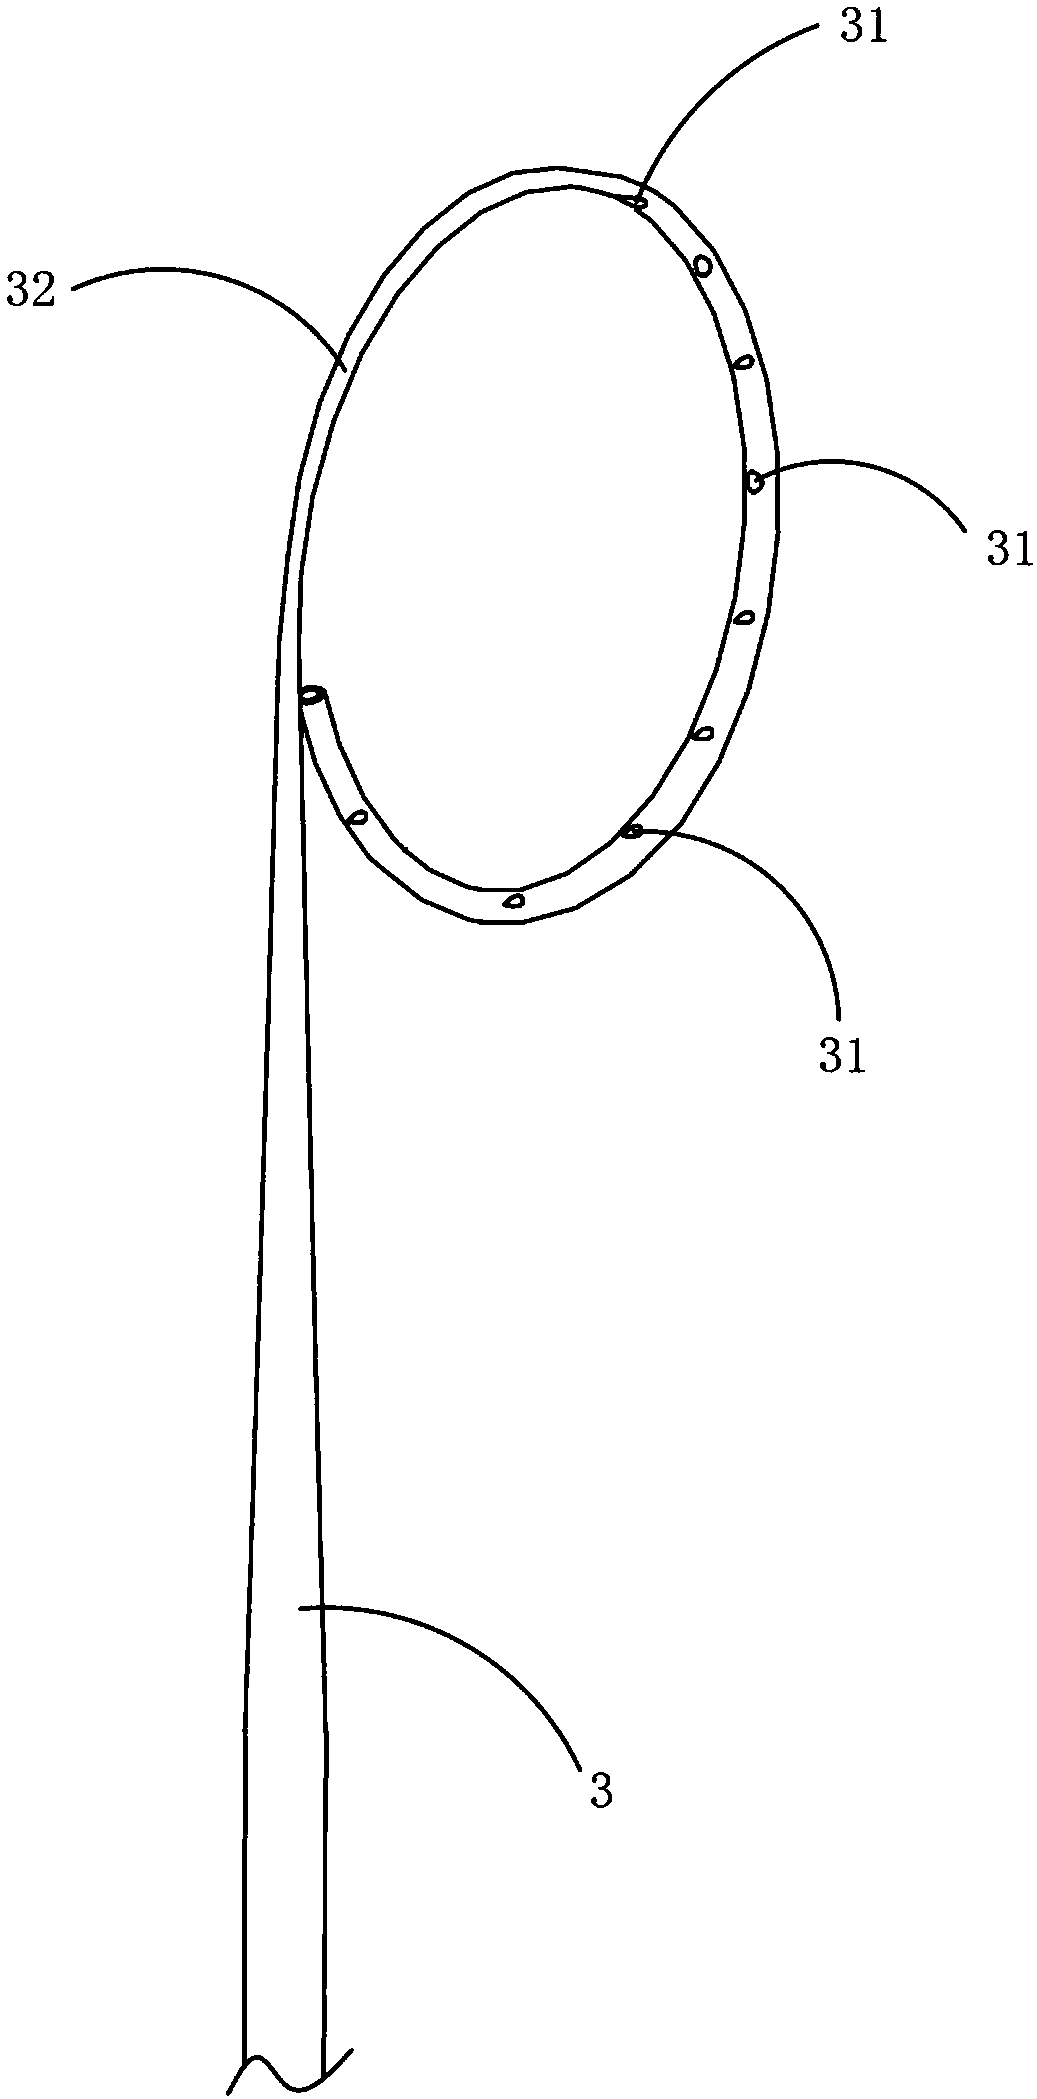 Pigtail-shaped peritoneal double-sleeve drainage catheter